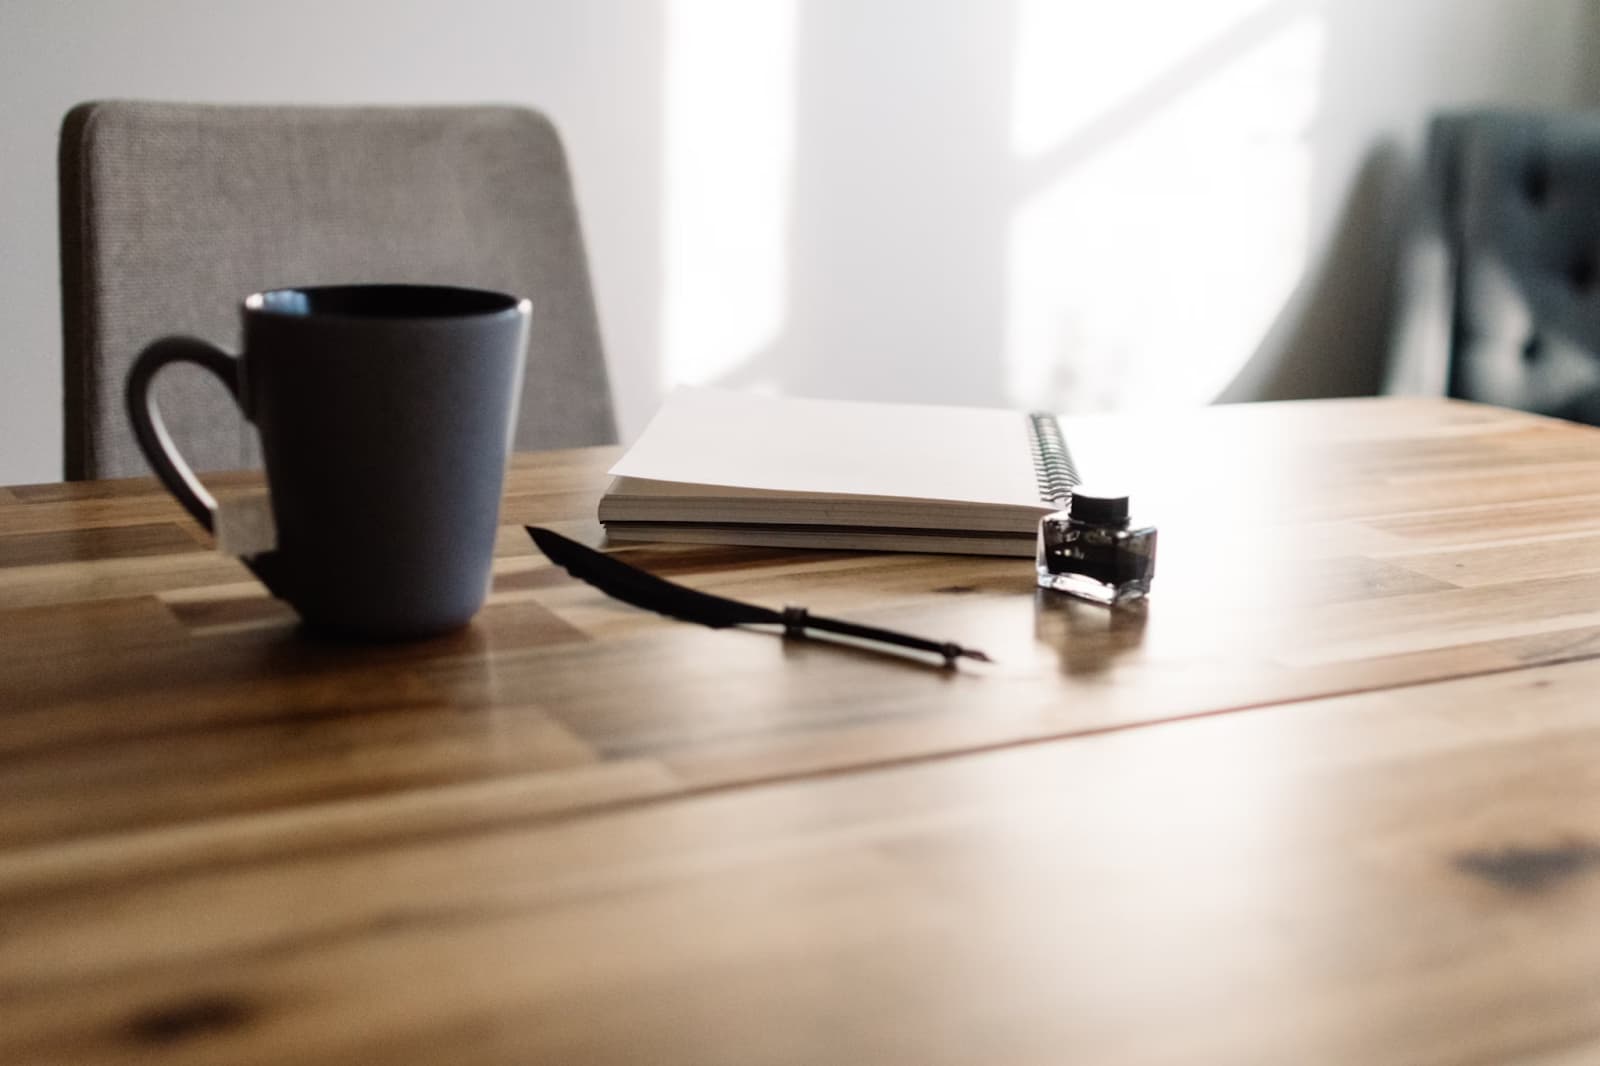 A serene workspace with a mug, notebook, and pen on a wooden table.